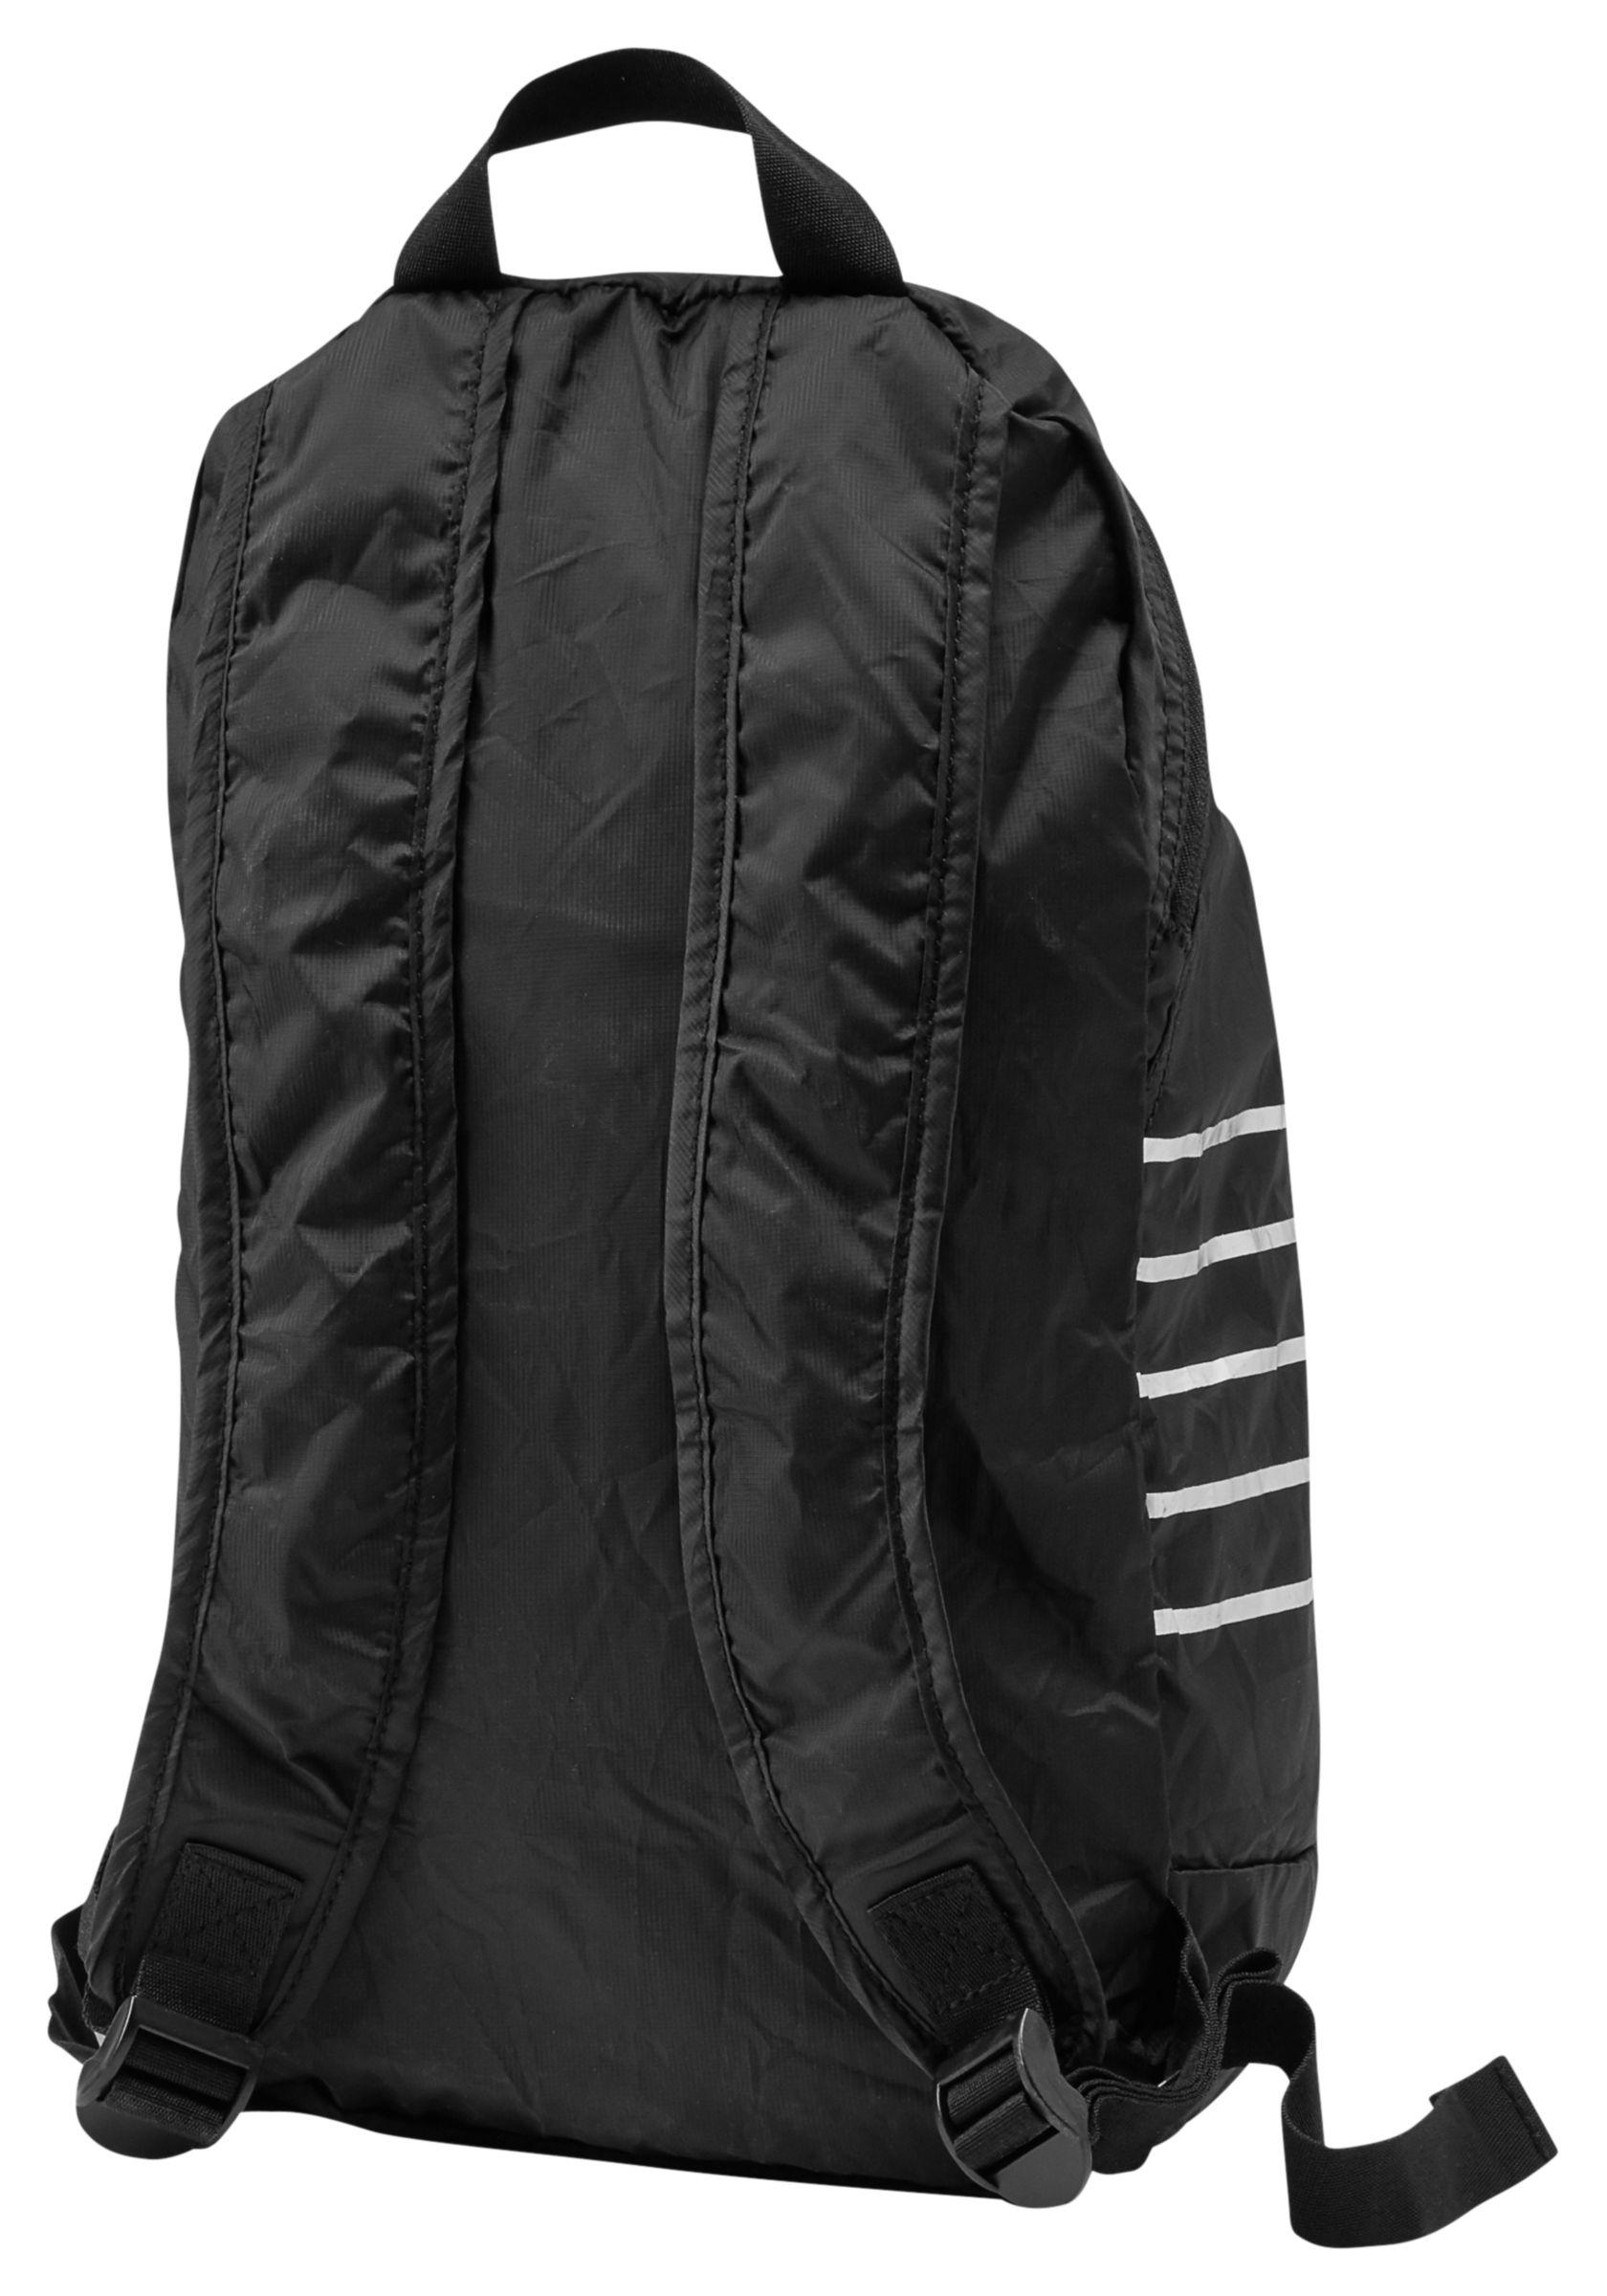 New Balance Nyc Marathon Packable Backpack in Black for Men - Lyst